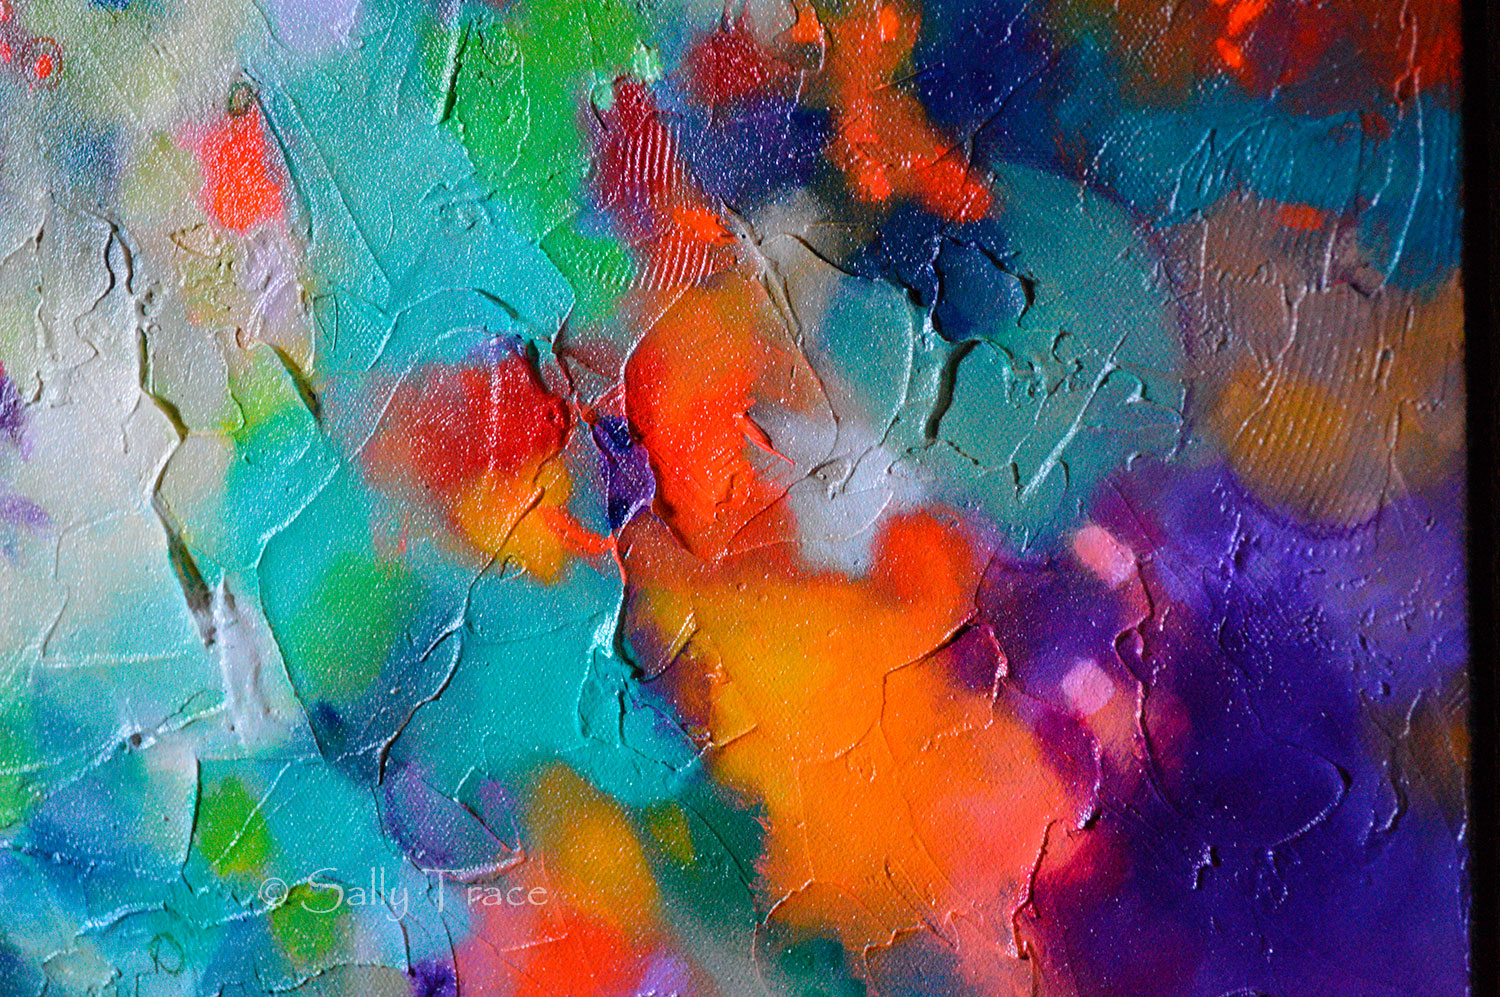 "Lifting Clouds" original fine art abstract textured painting for sale by Sally Trace, detail